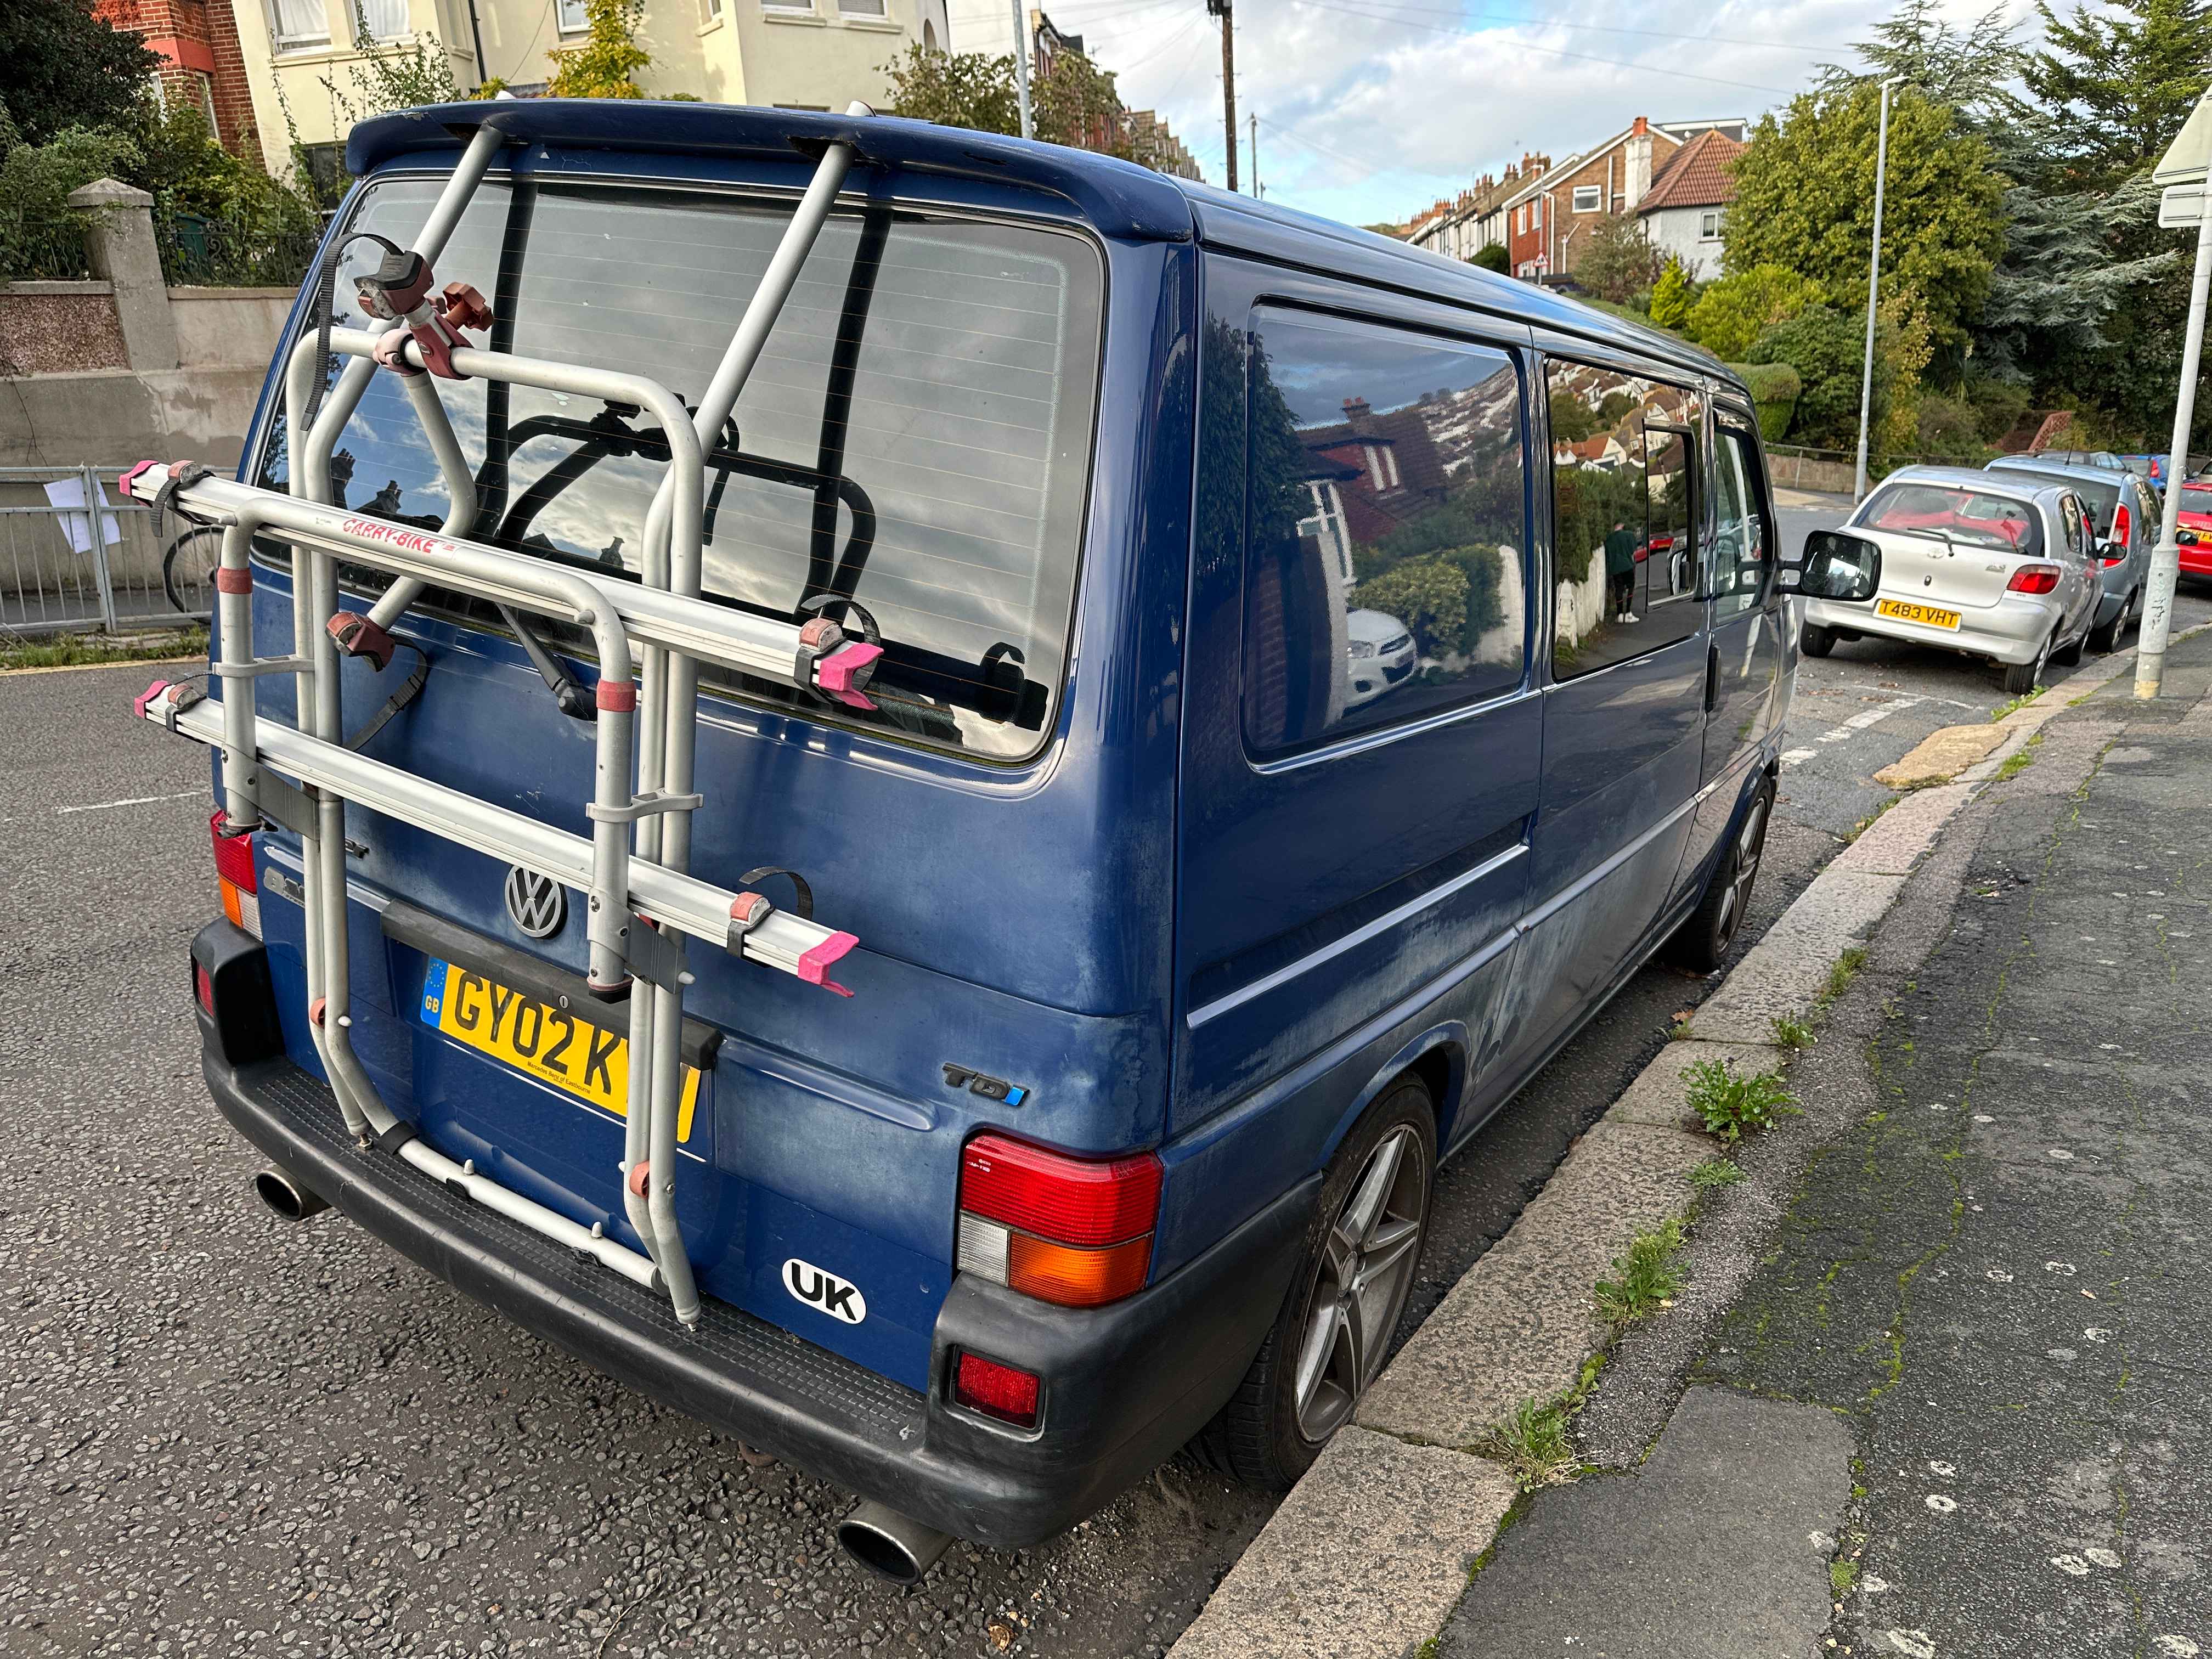 Photograph of GY02 KYW - a Blue Volkswagen Transporter camper van parked in Hollingdean by a non-resident. The fourteenth of eighteen photographs supplied by the residents of Hollingdean.